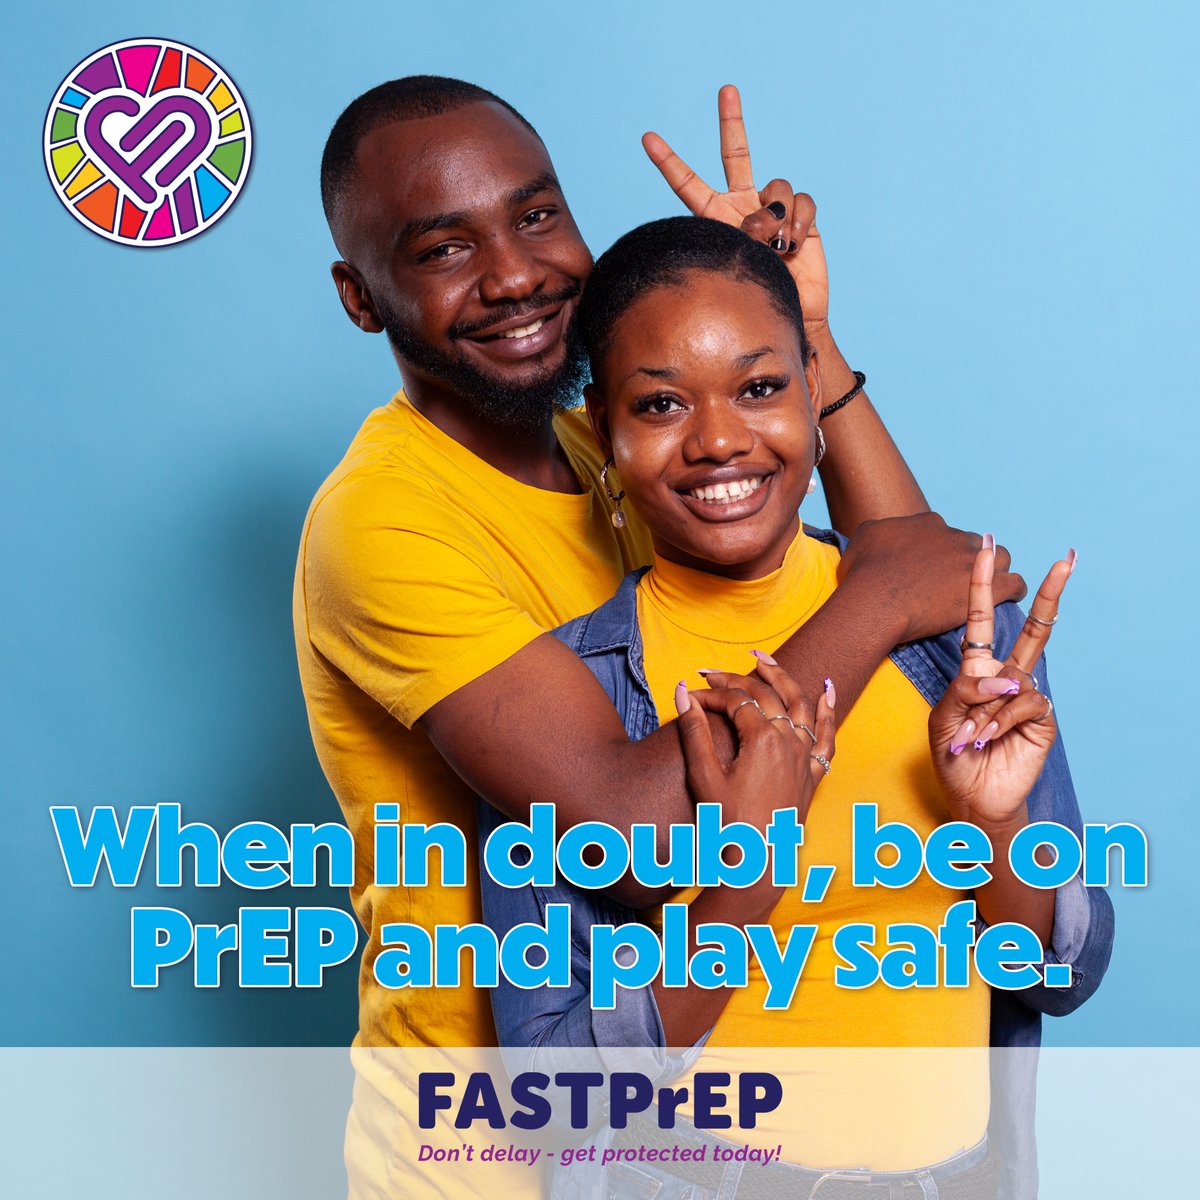 Being on PrEP means you are taking charge of your sexual health.

#fastprep #stayprotected #desmondtutuhealthfoundation #preexposureprophylaxis #hivfreegeneration
#sexualhealth #ENDHIV #StrongerTogether